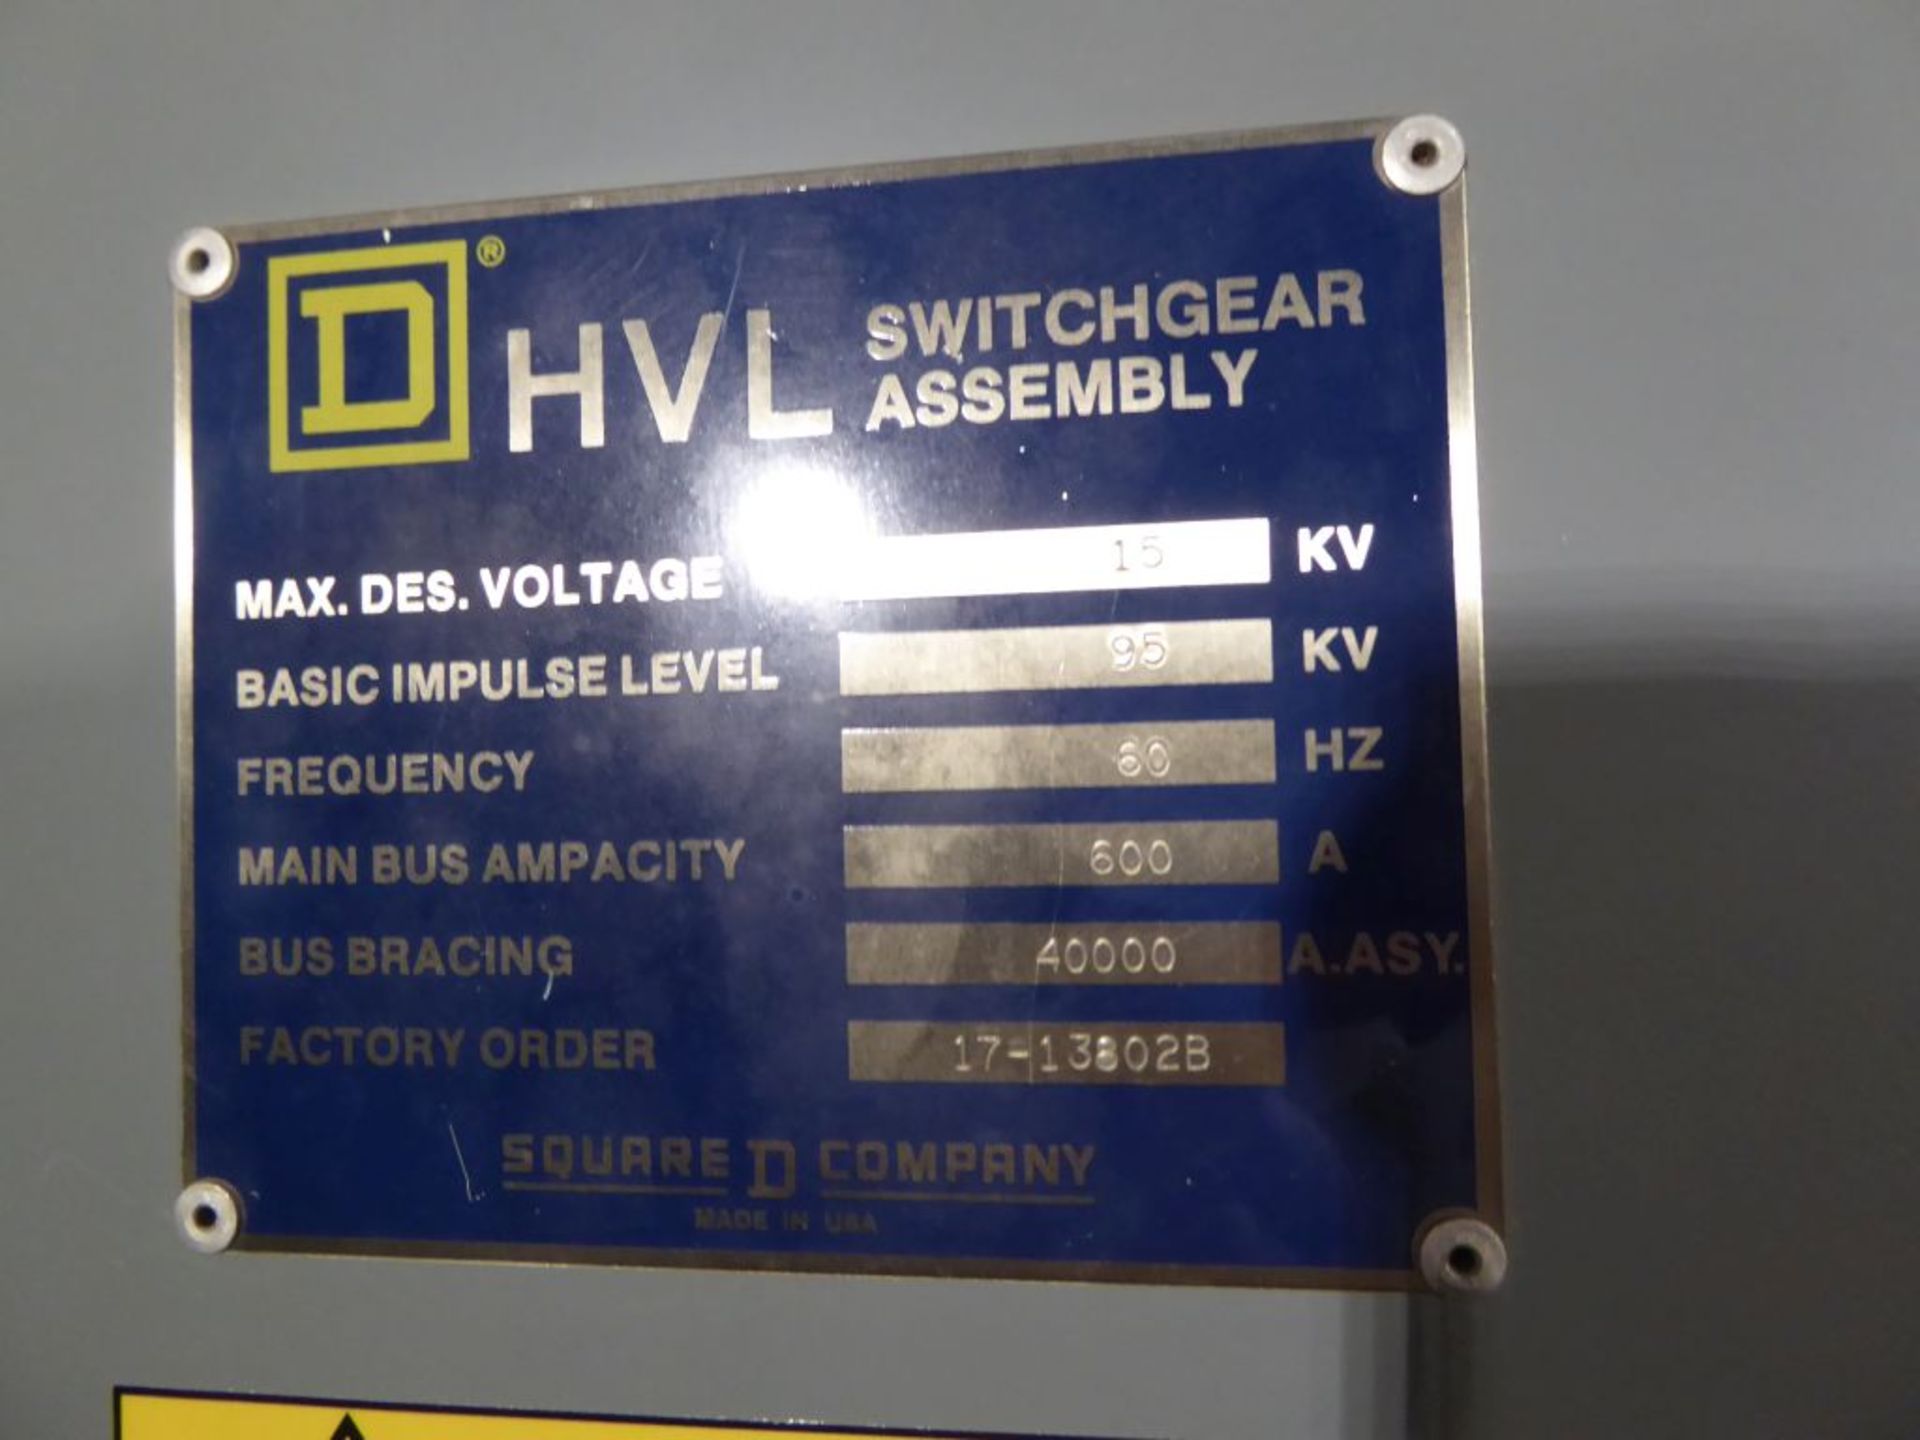 Charlotte, NC - Square D Powerzone Switch Assembly - Image 3 of 5